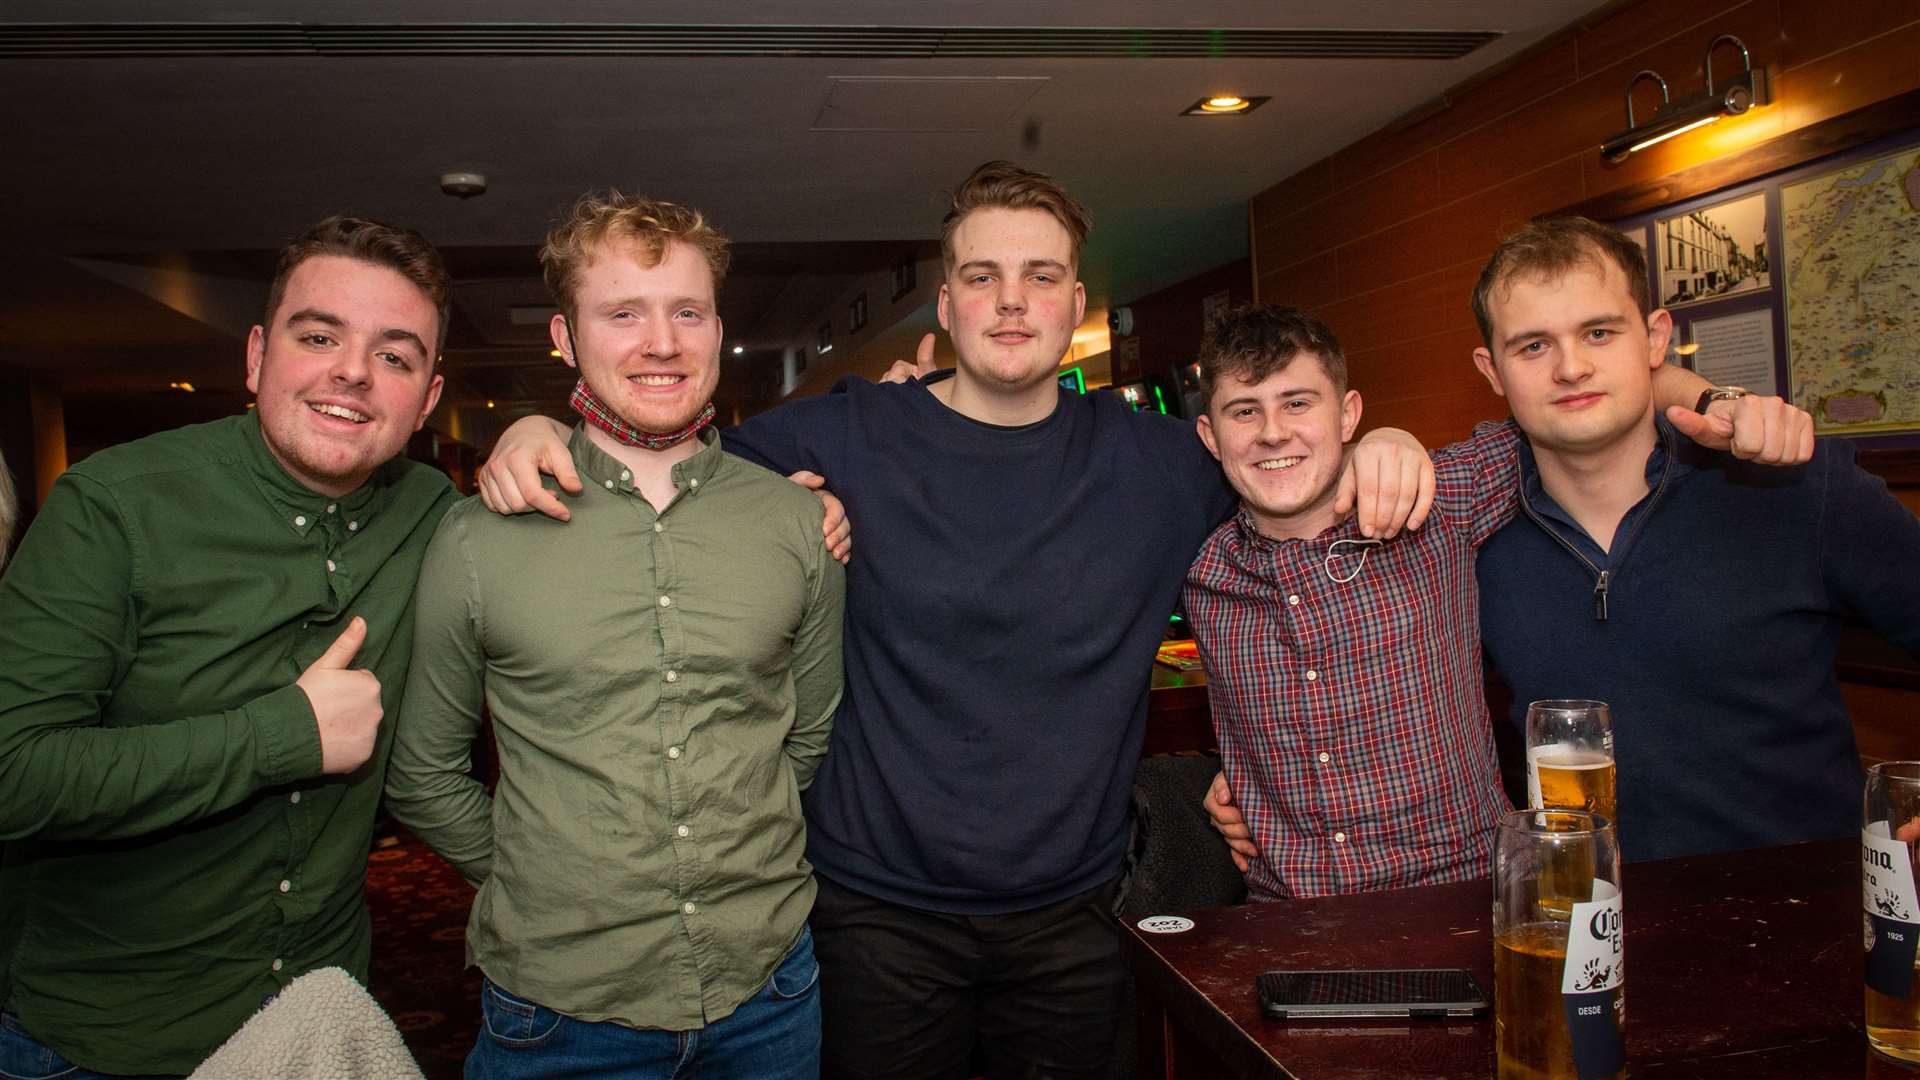 Jack Macleod, Ben Cluckie, Jake Pirrie, David Hunter and Finlay Tulloch. Picture: Callum Mackay.